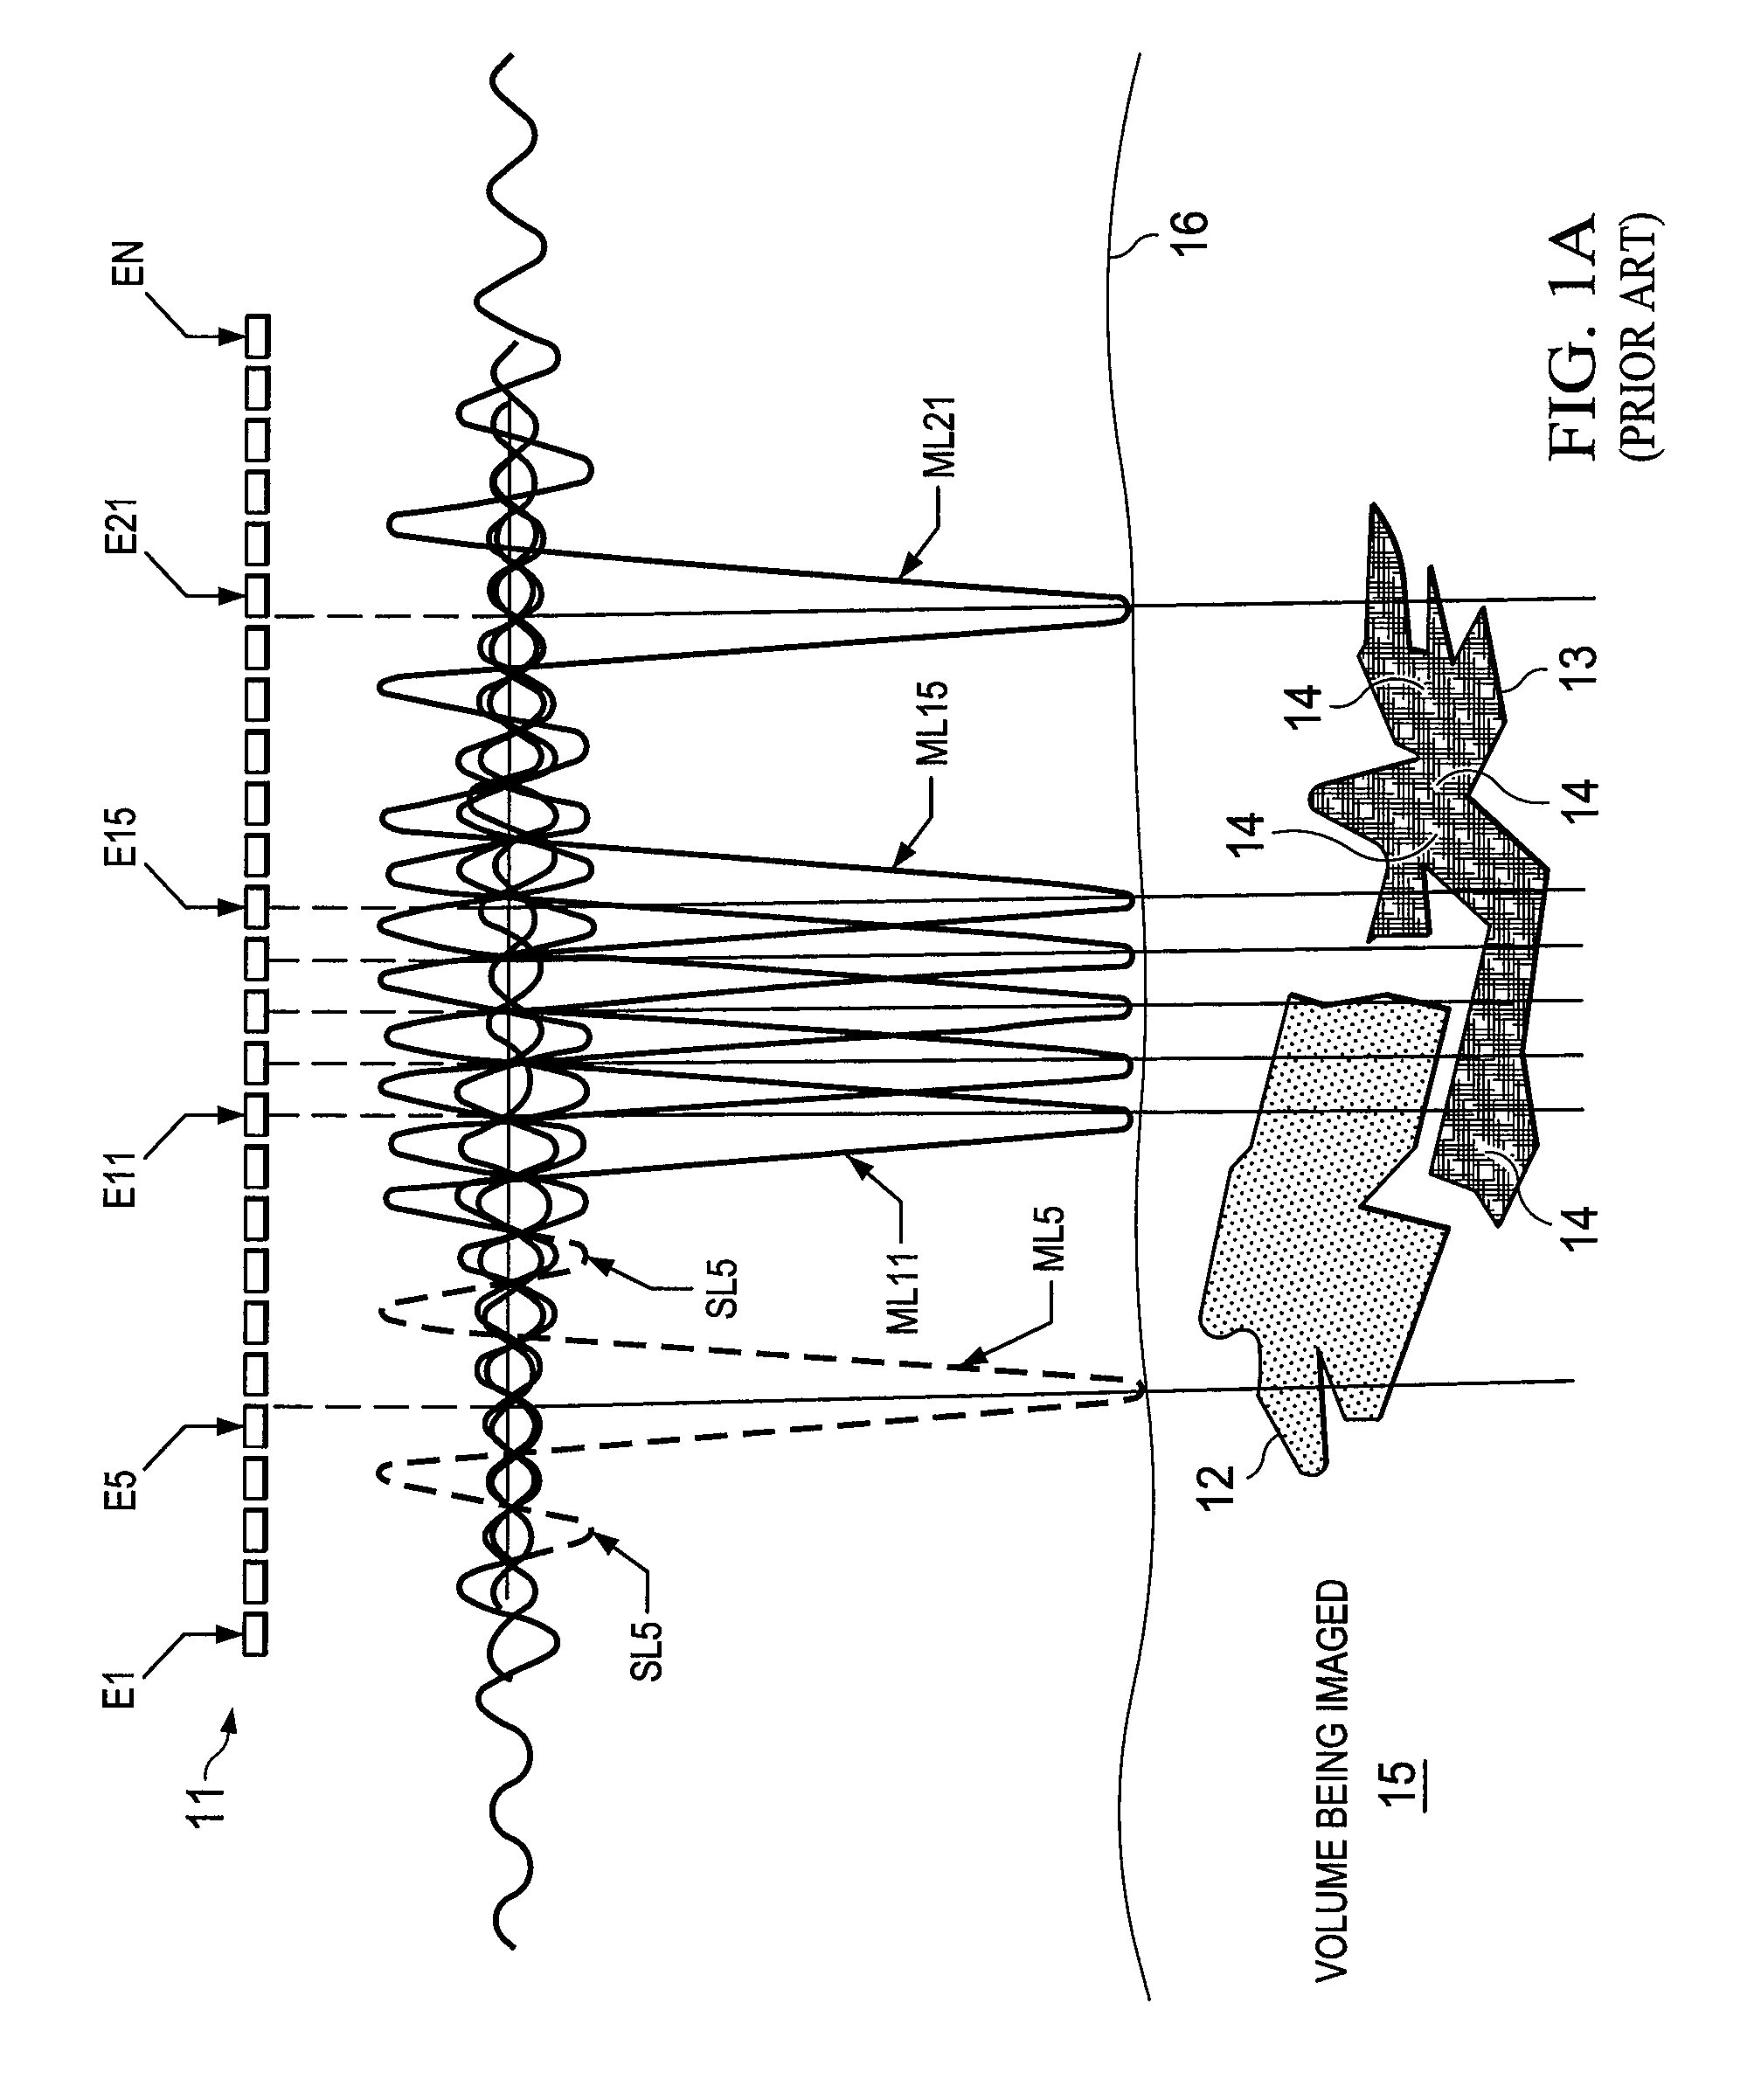 Systems and methods for beam enhancement